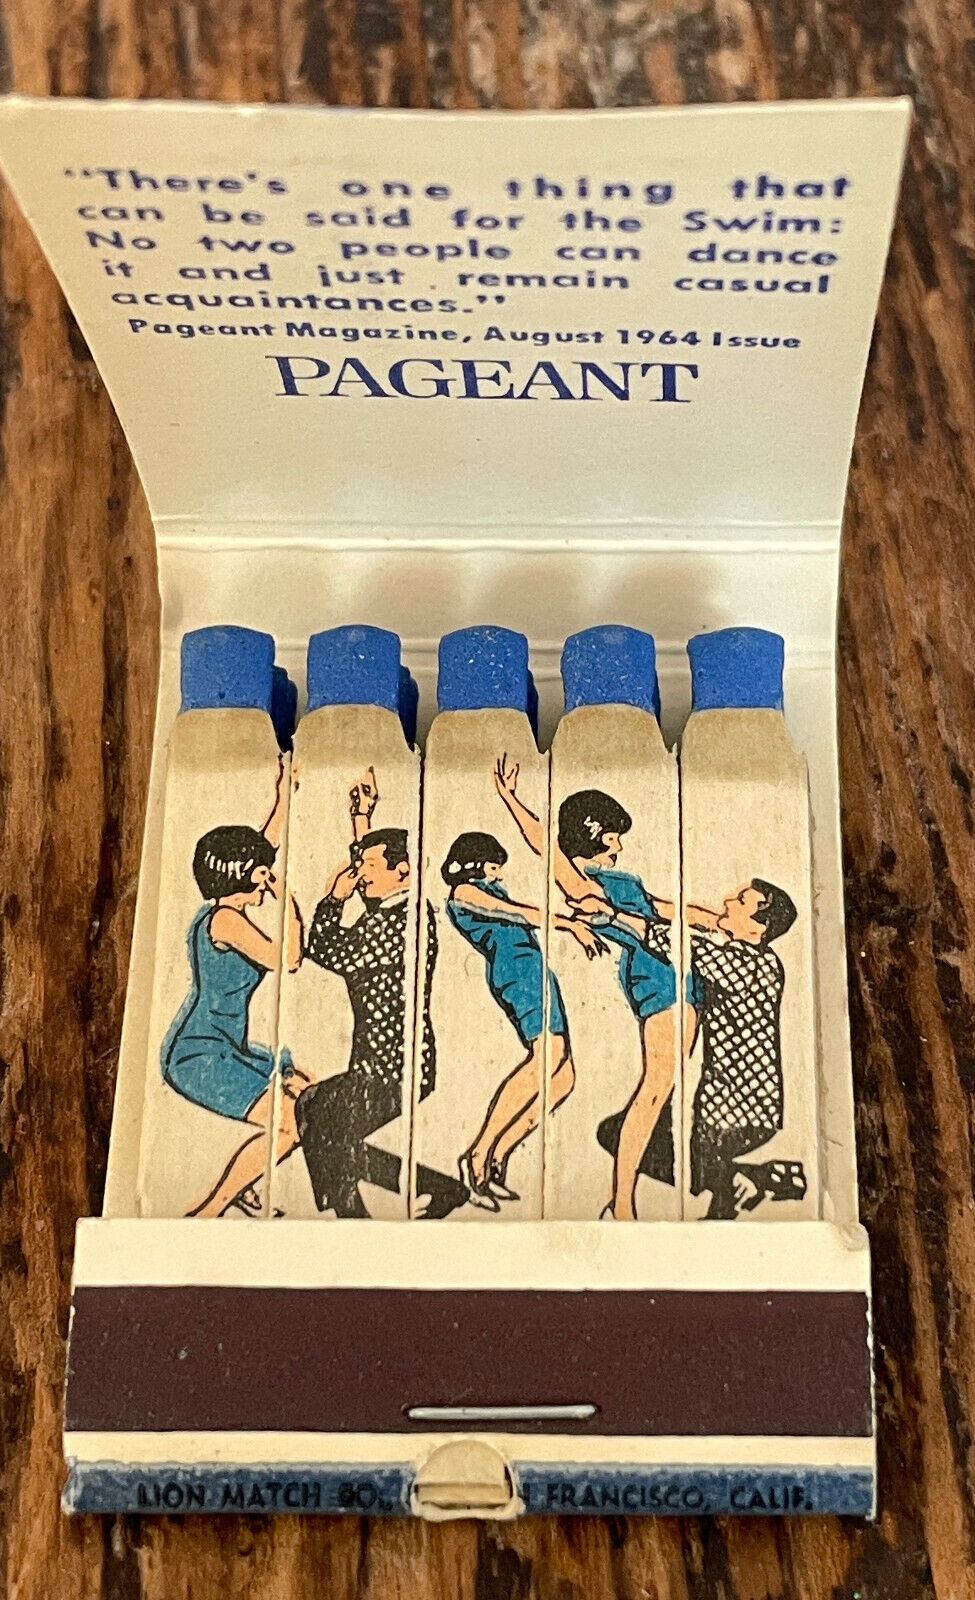 Galaxie Club San Francisco Swim Dance VTG Matchbook Illustrated Matches Complete